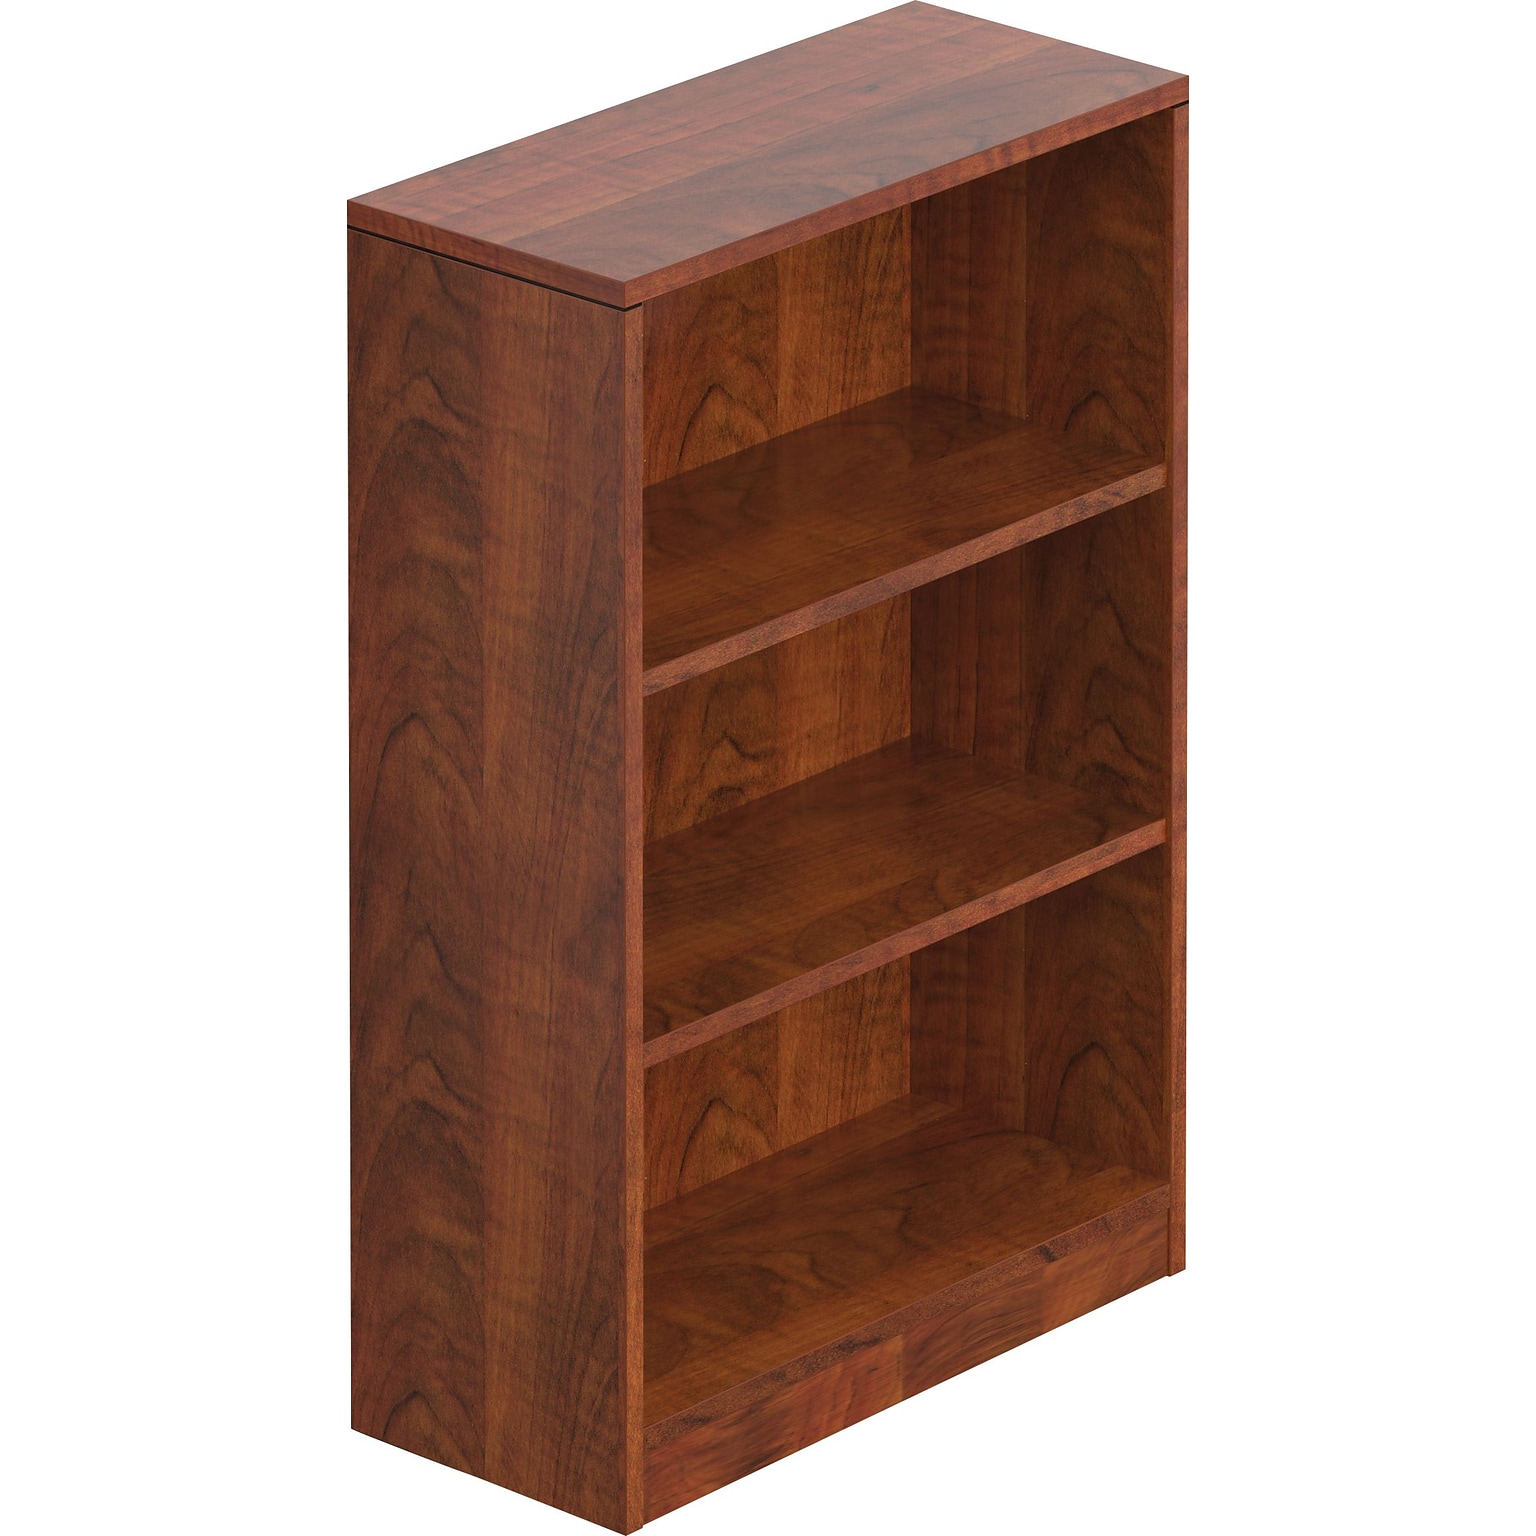 Offices to Go Superior Laminate 48H 2-Shelf Bookcase with Adjustable Shelves, American Dark Cherry (TDSL48BC-ADC)